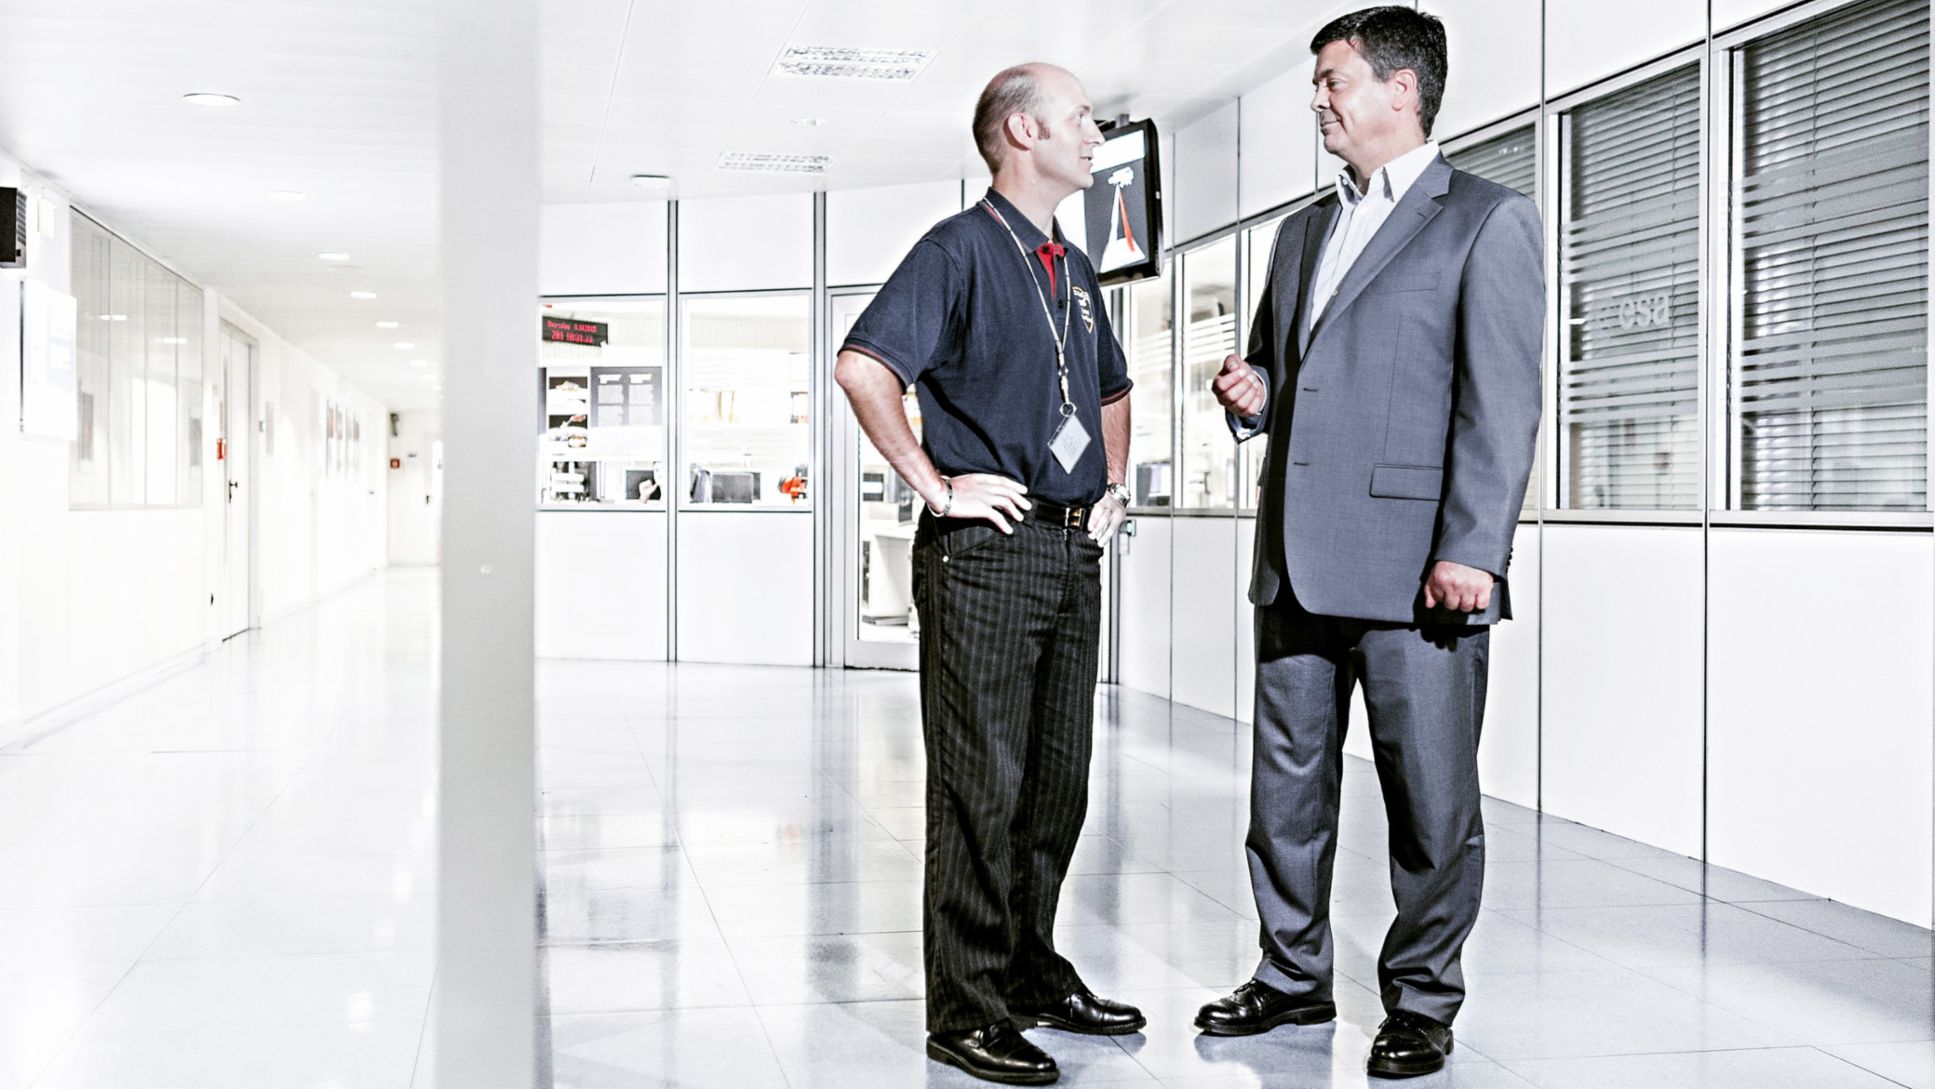 Technical Officer Jean-Christophe Berton (l.) and Dr. Jörg Reinhardt, director of the ESOC contract department, 2017, Porsche AG